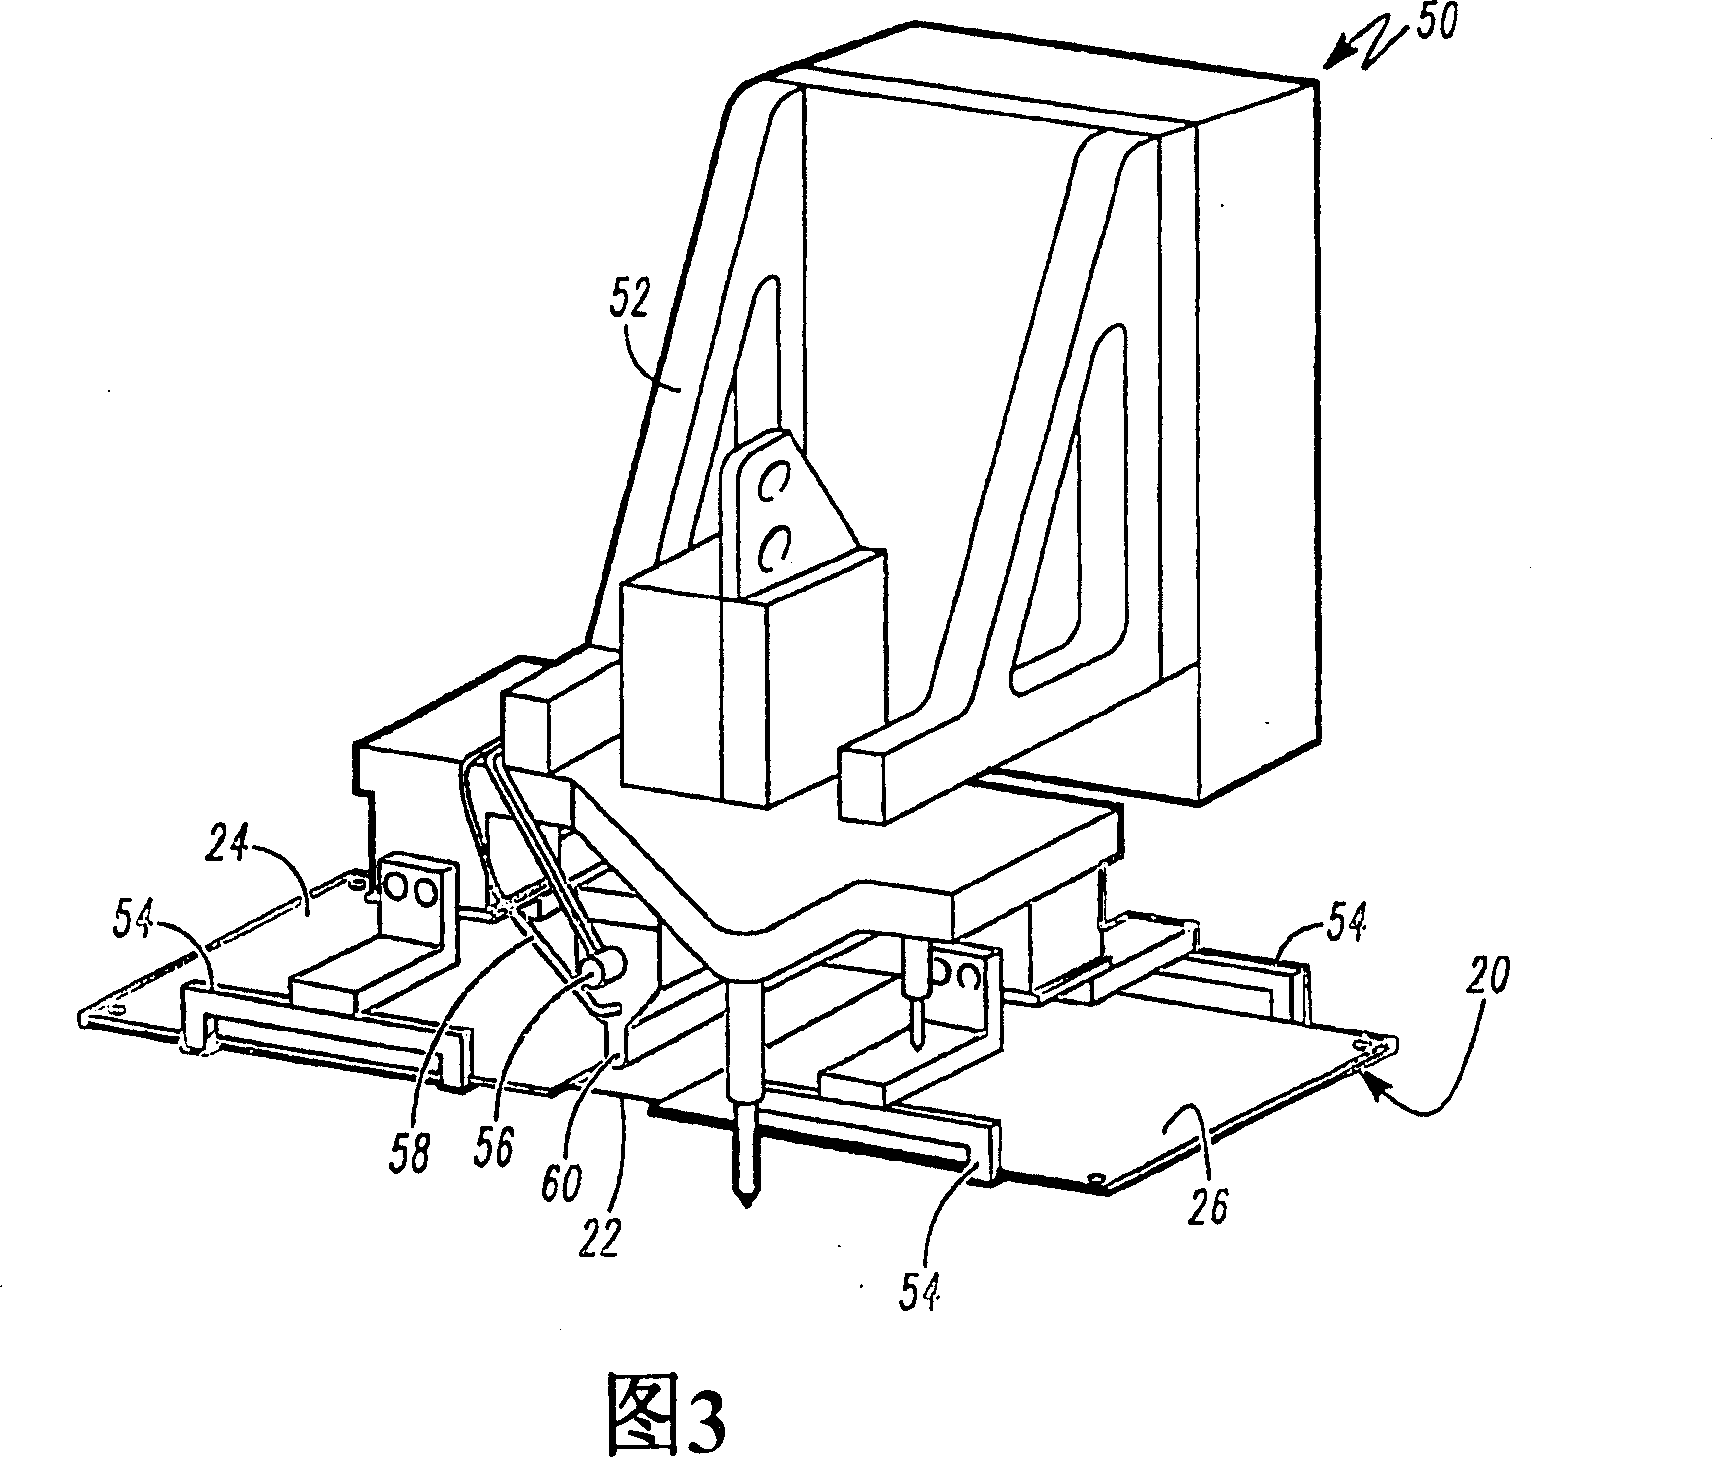 System and method for bending a substantially rigid substrate